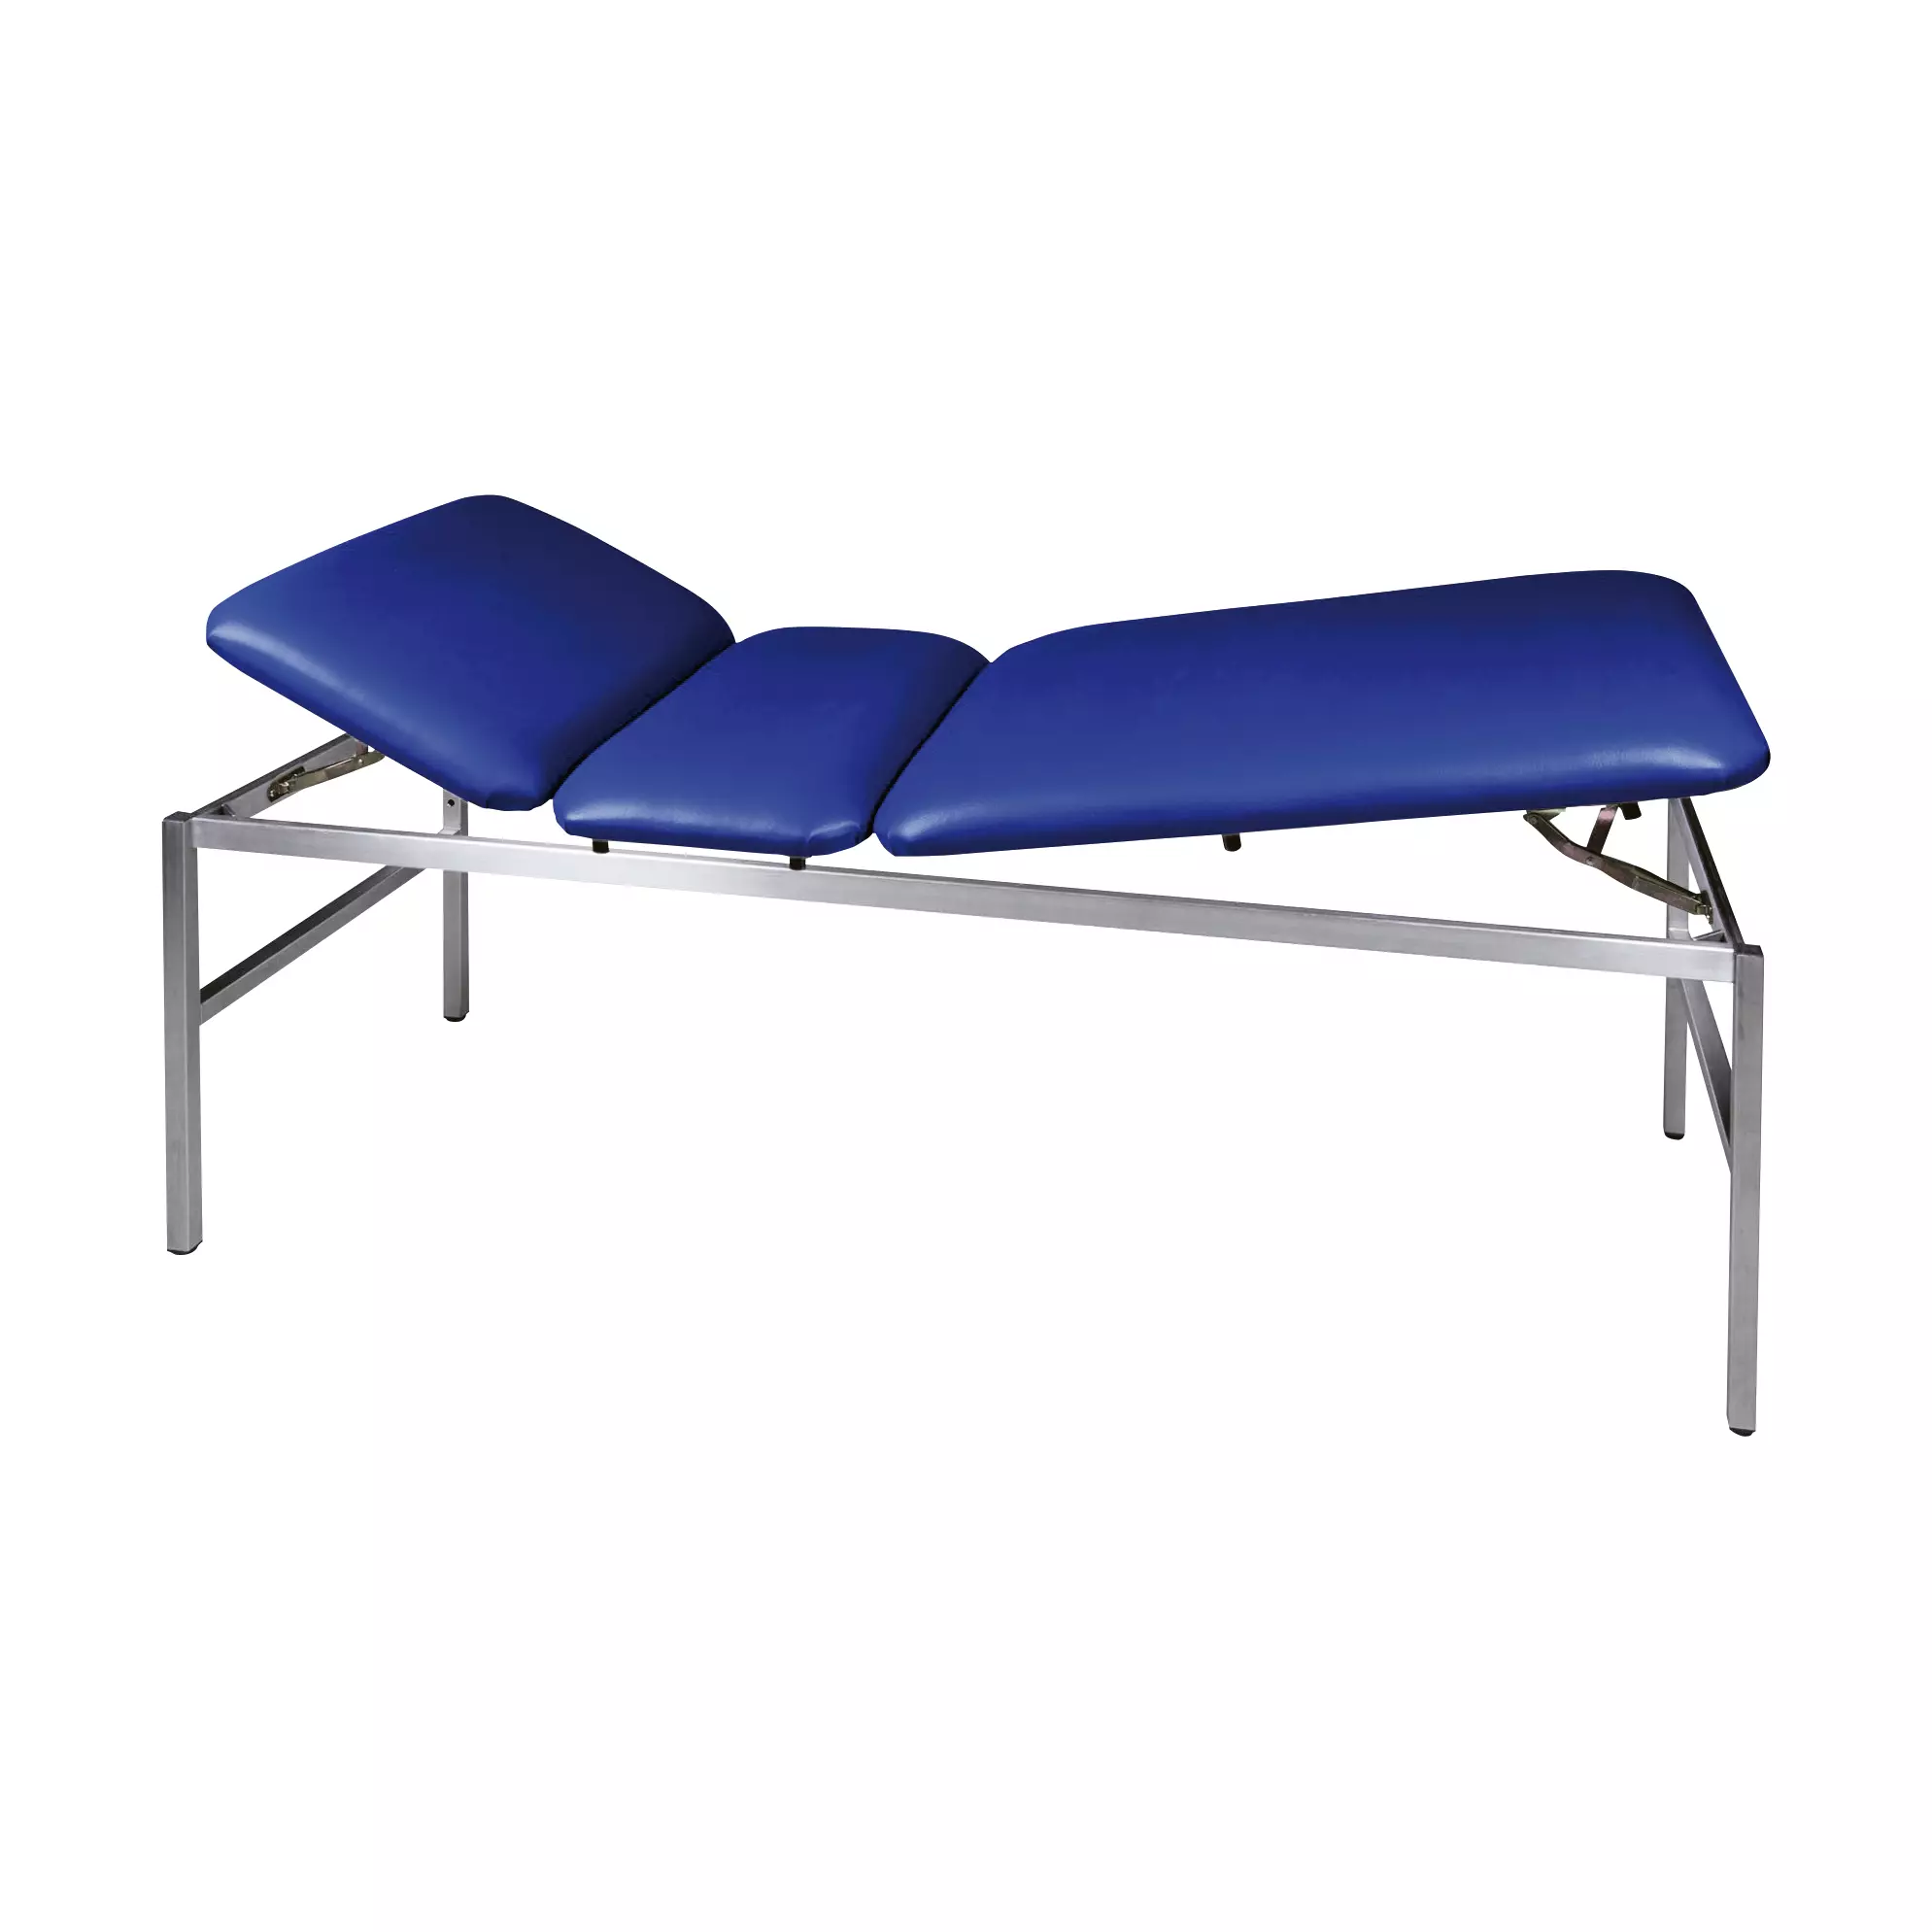 Examination and massage table model 1520 - Blue